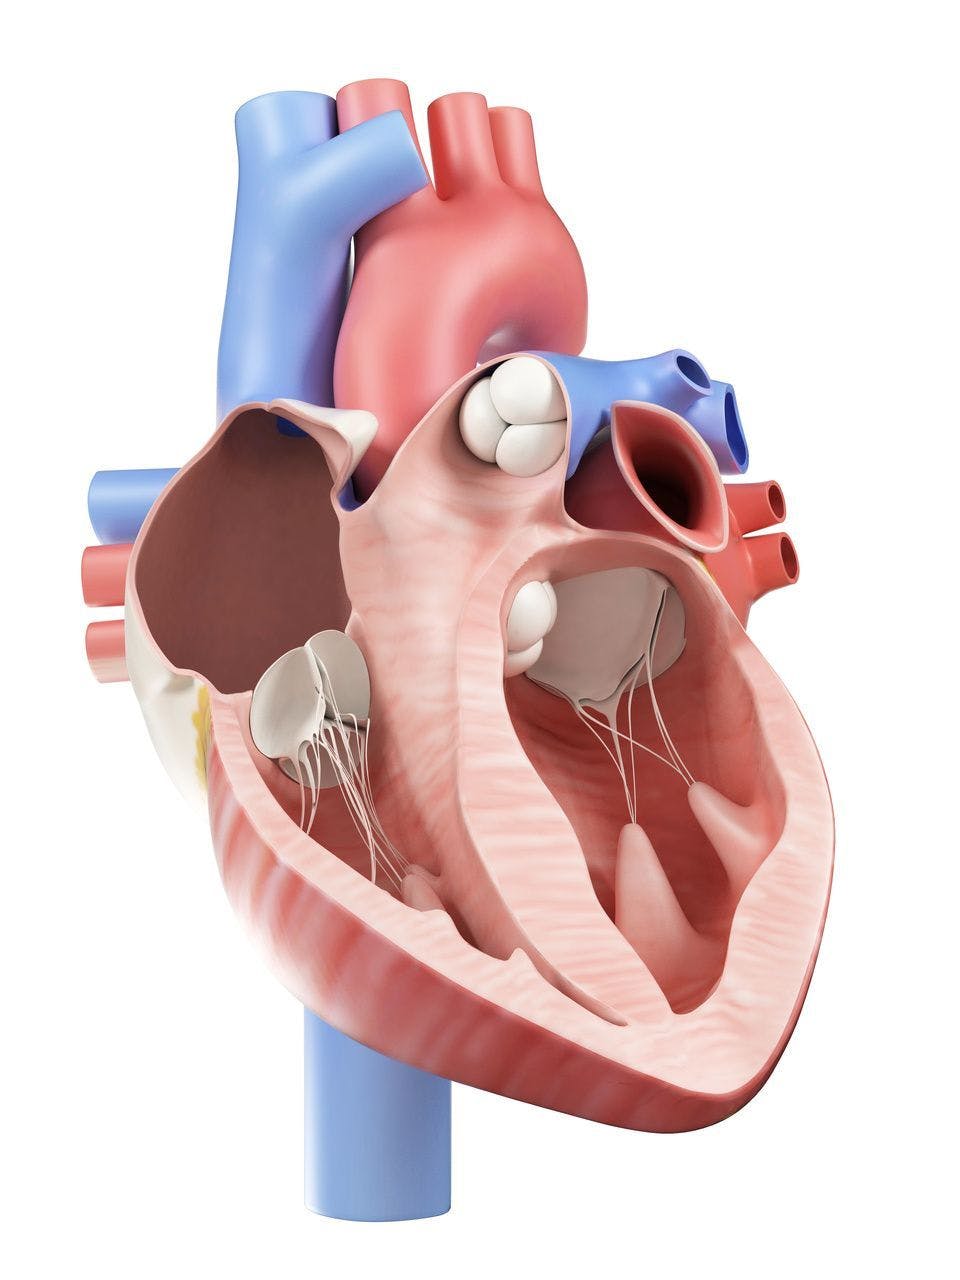 Refractory Angina Gene Therapy Demonstrates Safety and Efficacy in Phase 2 Trial 